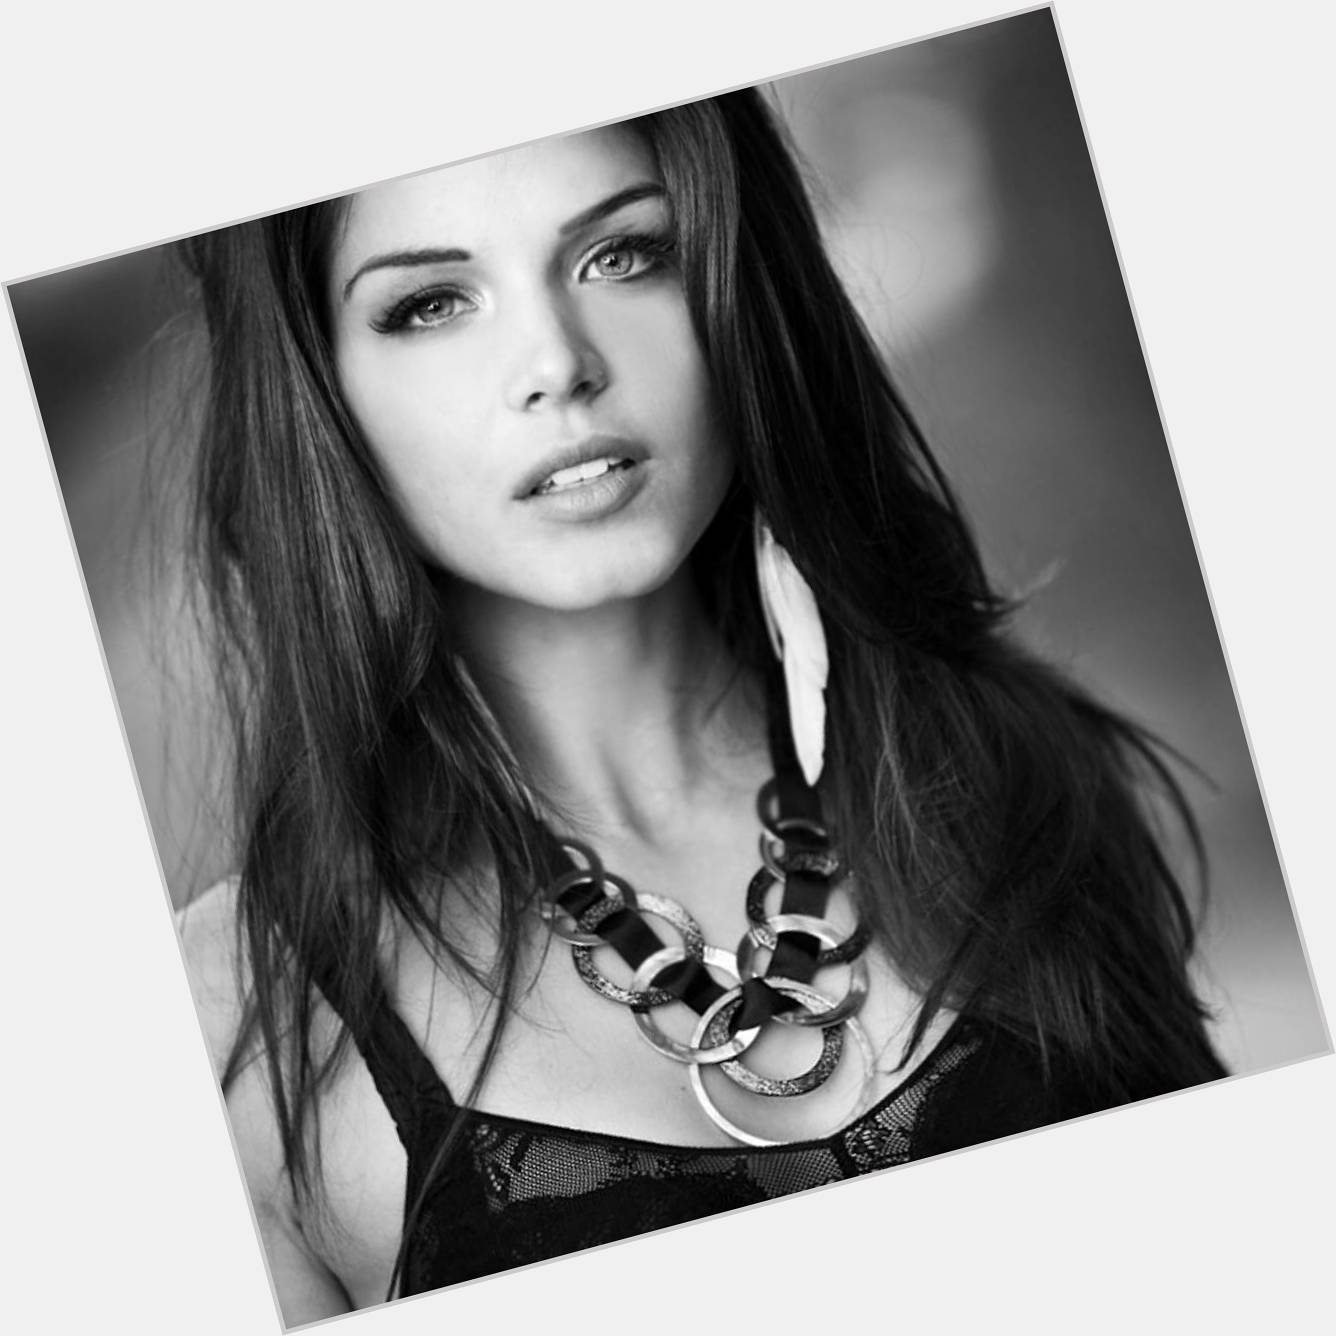 HAPPY BIRTHDAY TO THE STUNNING MARIE AVGEROPOULOS      